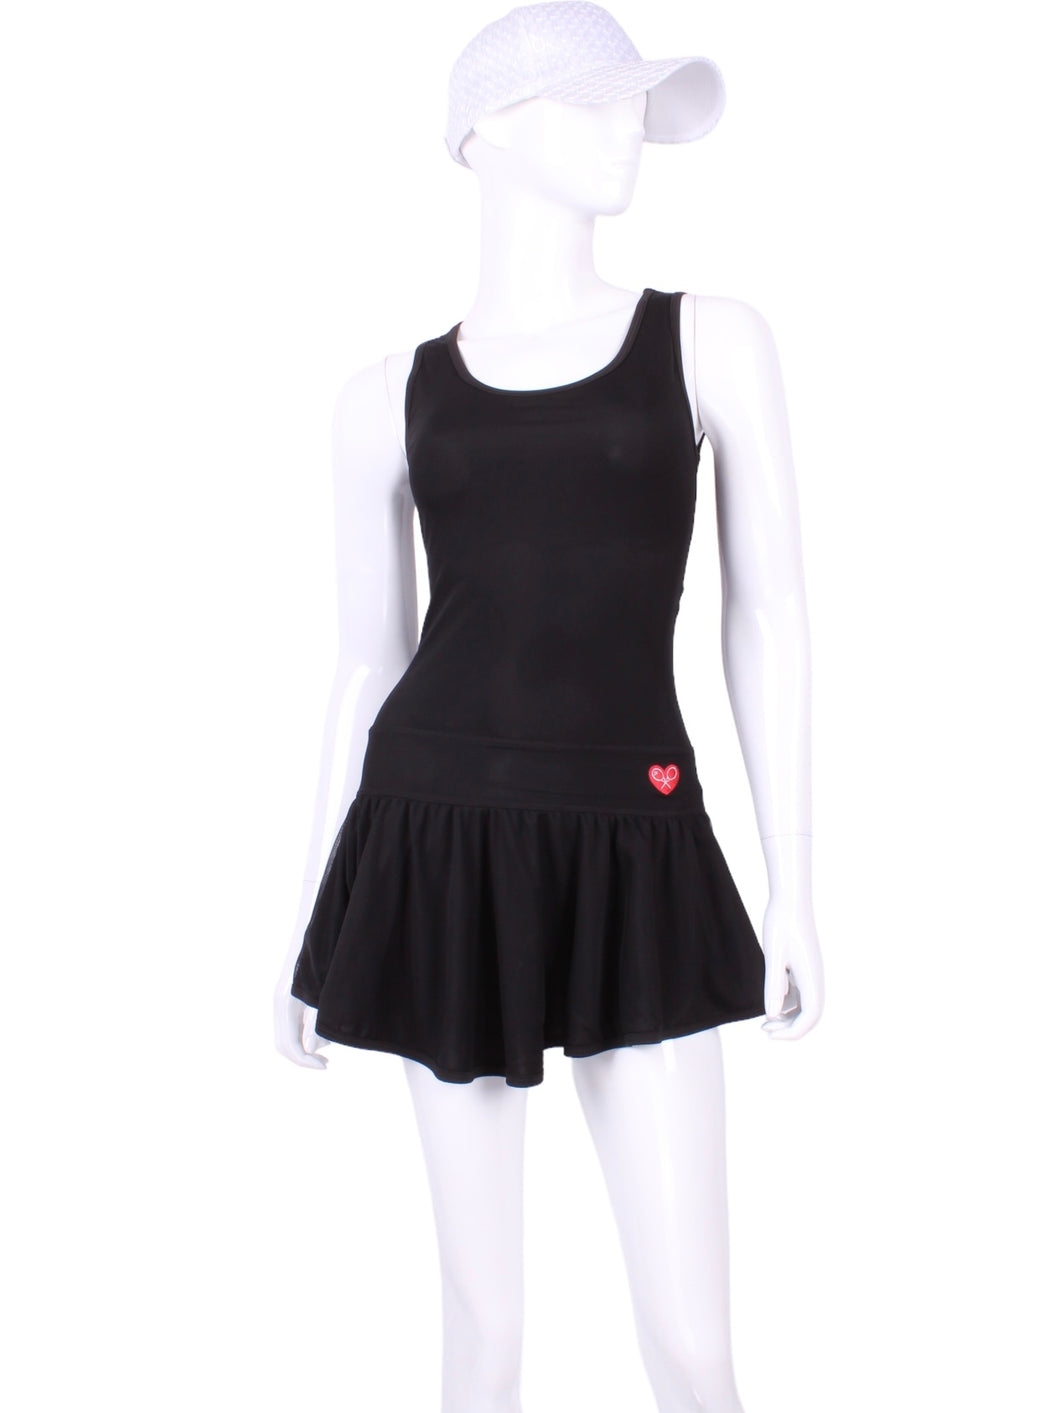 Sexy and soft black tennis dress to wear from the tennis court to cocktails because it's so elegant, comfortable and feminine.  Has a unique back tennis net pocket that holds two tennis balls, keeping them dry and behind you when you play.